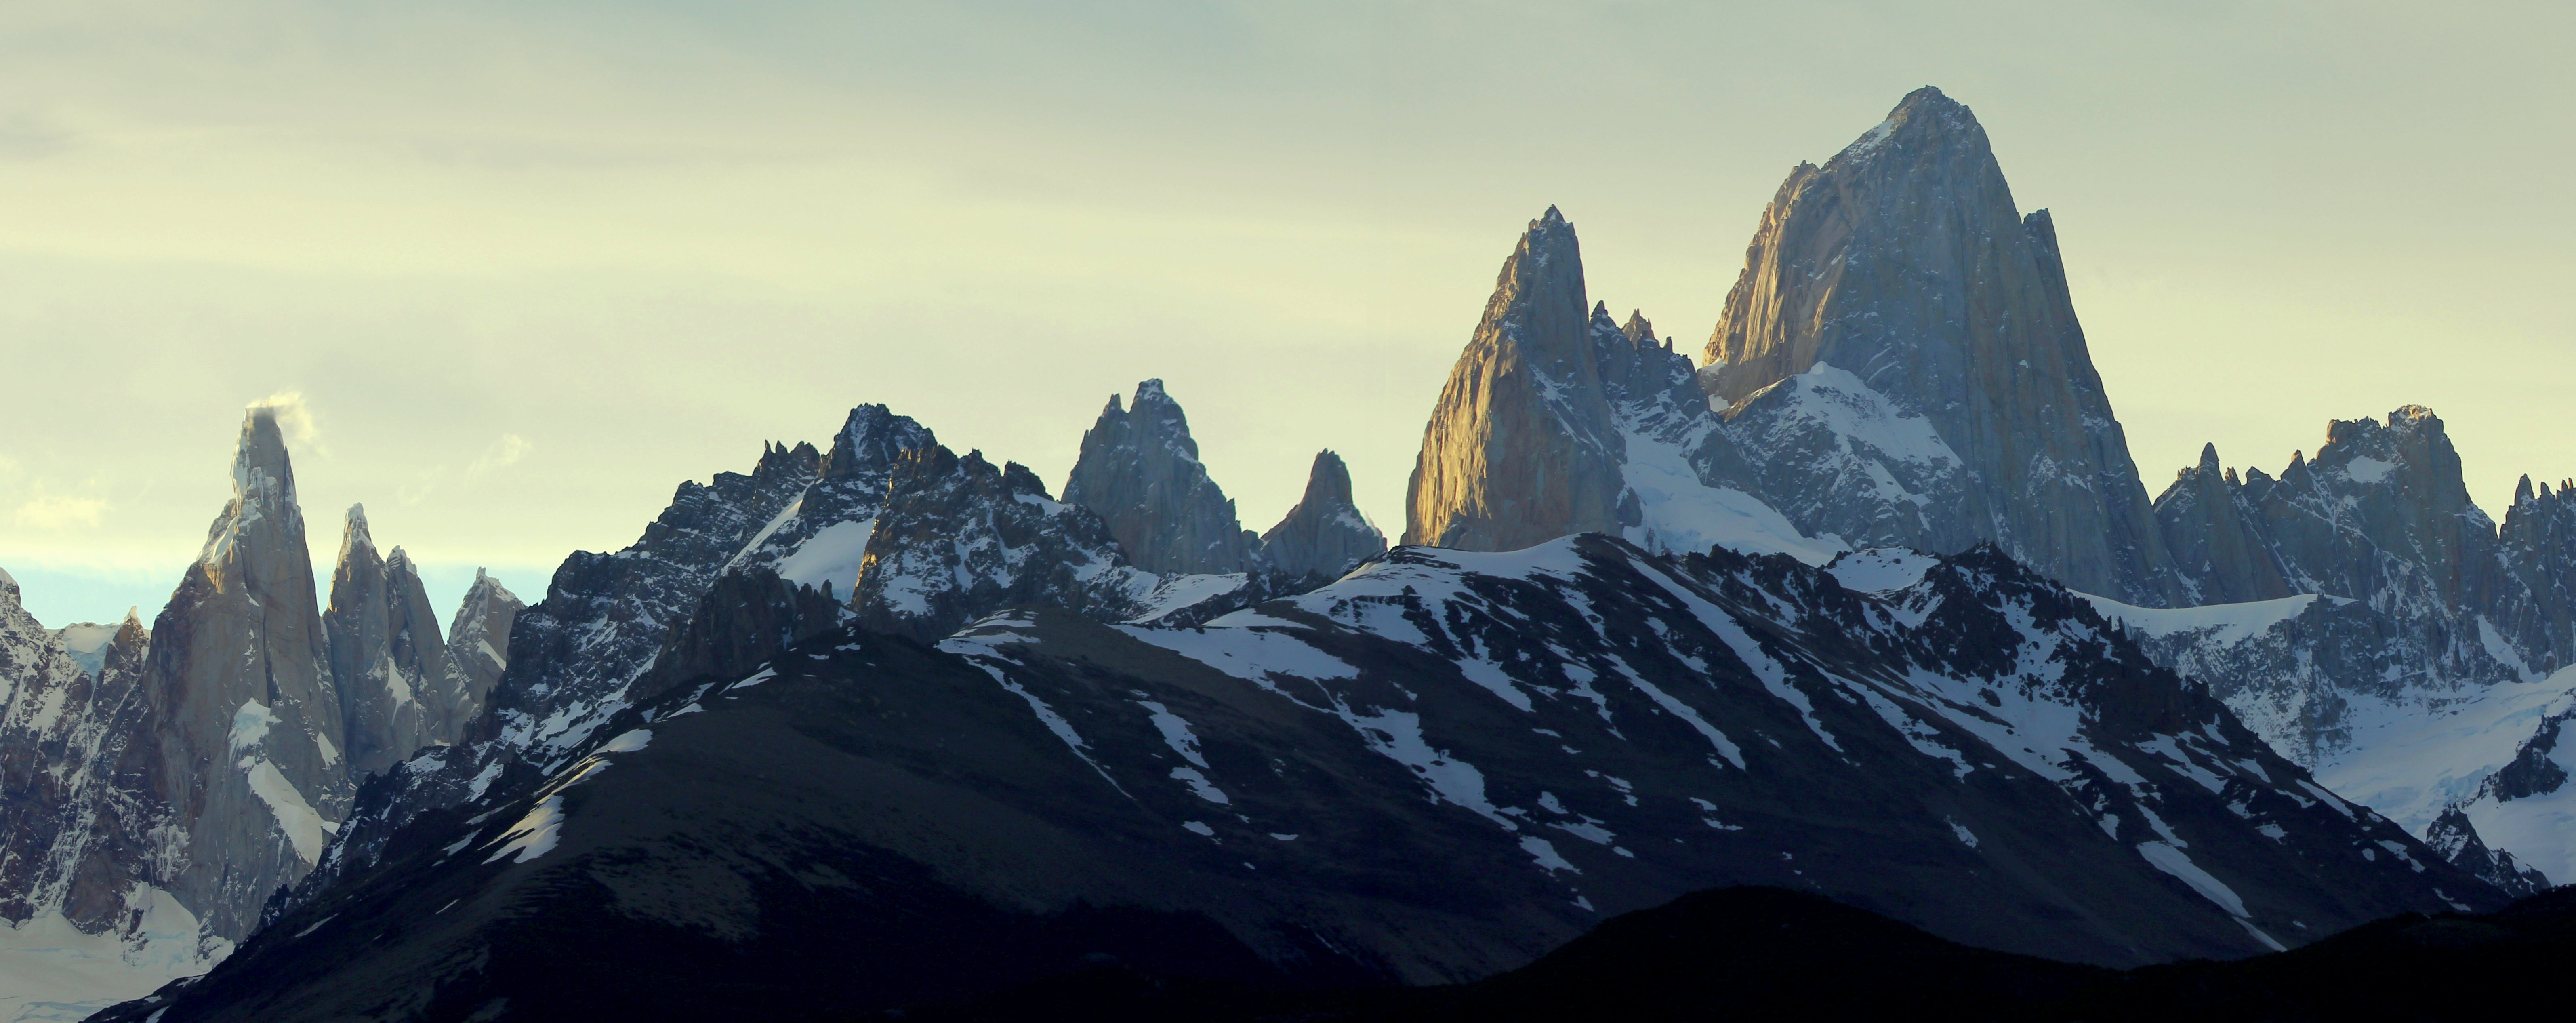 A panorama showing the last rays of the day striking the distinctive peaks of the Fitz Roy sector of Parque Nacional Los Glaciares in southern Patagonia, Argentina. November 3, 2015.